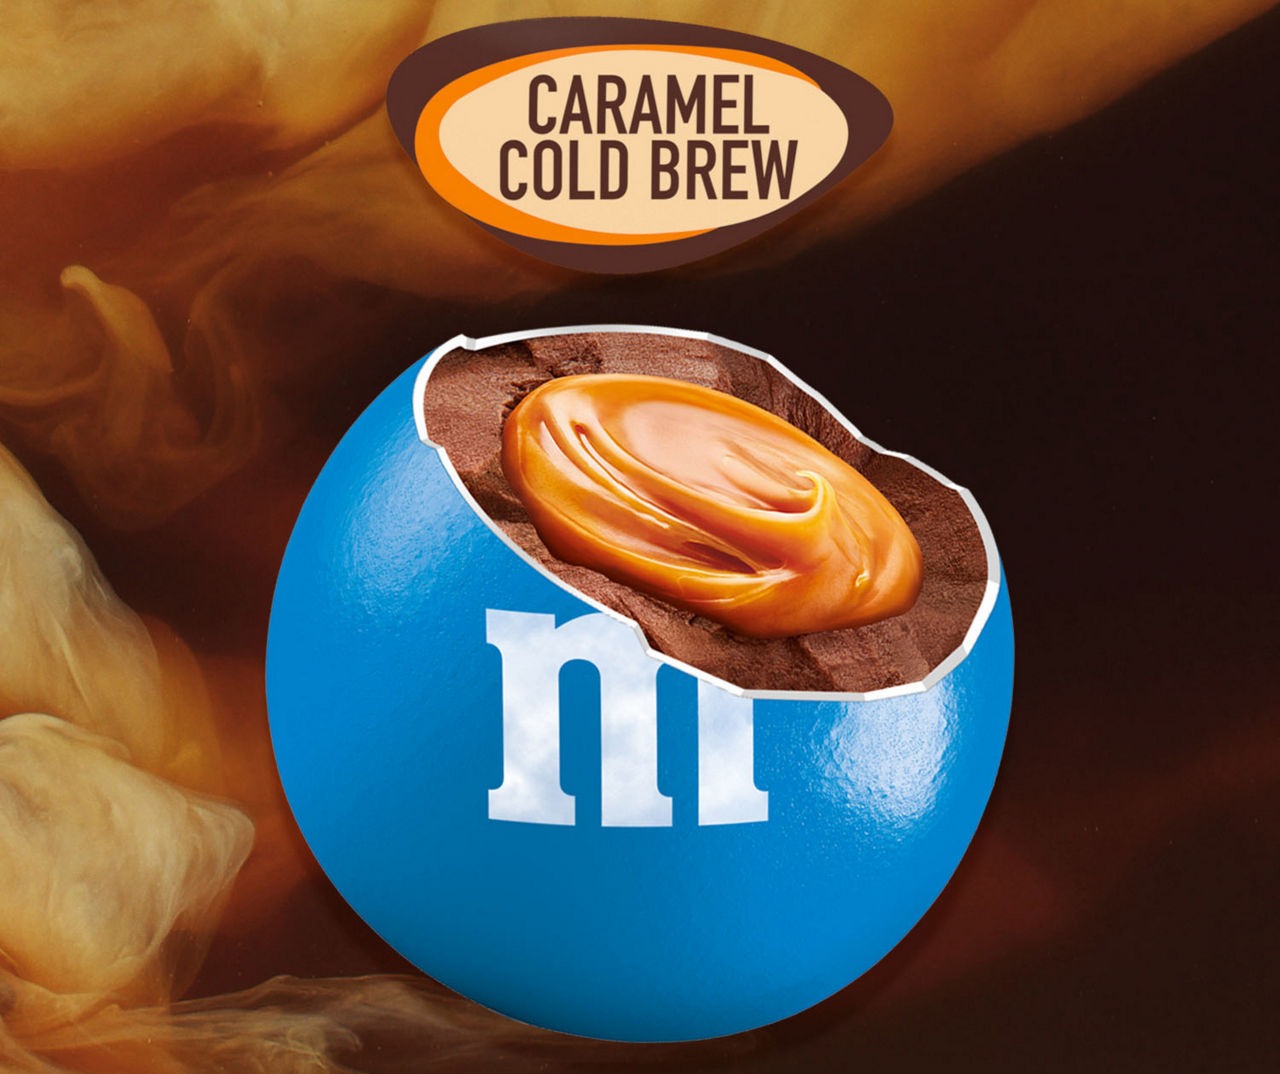 SPECIAL M&M's Chocolate Caramel Cold Brew Flavour, Big Sharing Size 25